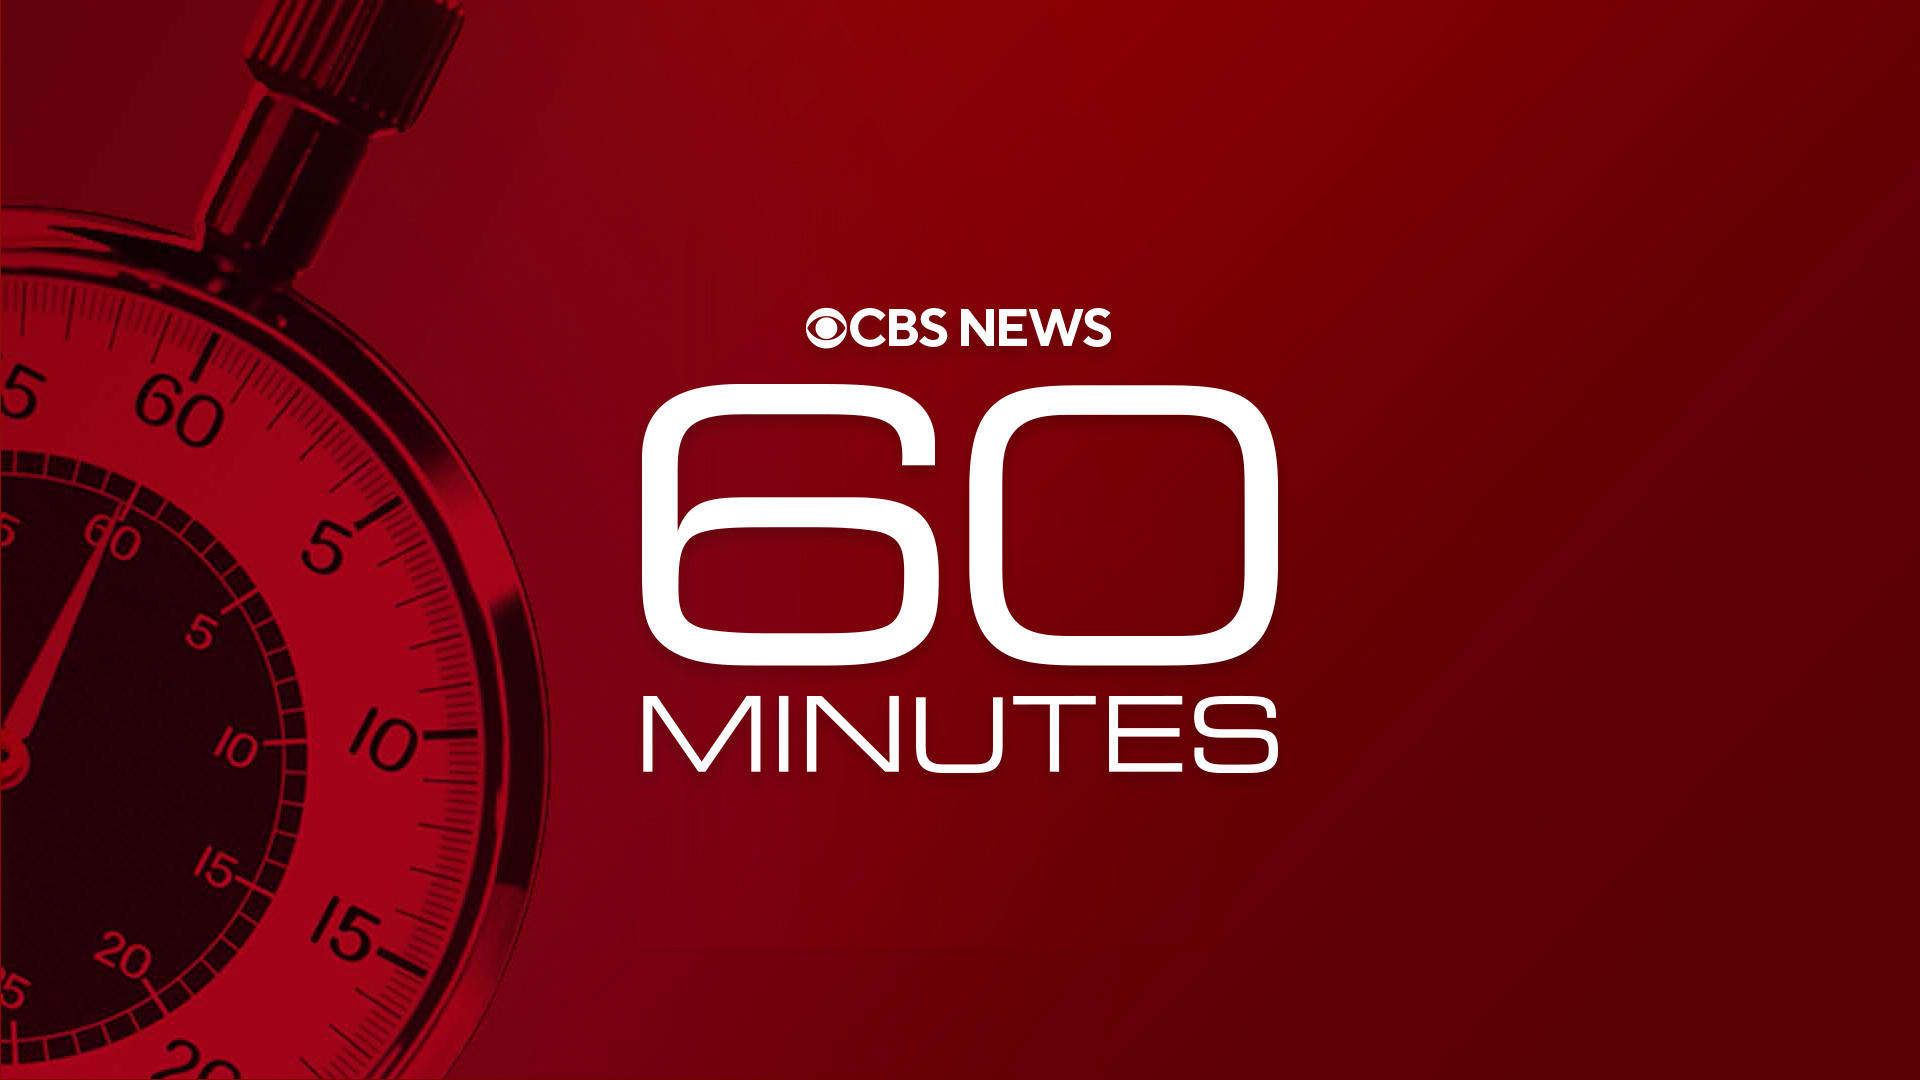 Watch CBS Evening News: Candy company uses cocoa harvested by child labor -  Full show on CBS